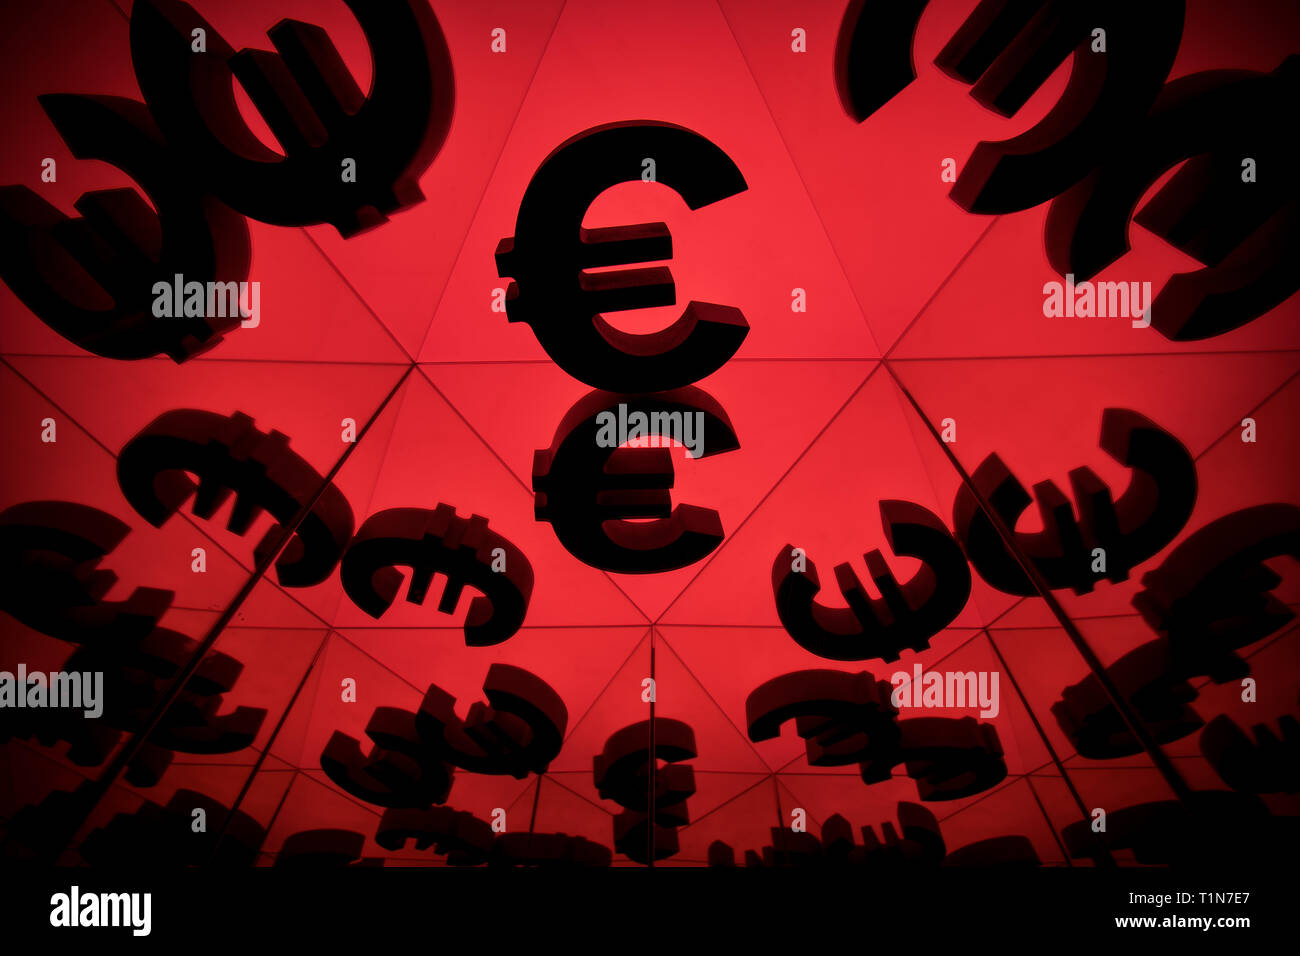 Euro Currency Symbol With Many Mirroring Images of Itself on Red Background Stock Photo